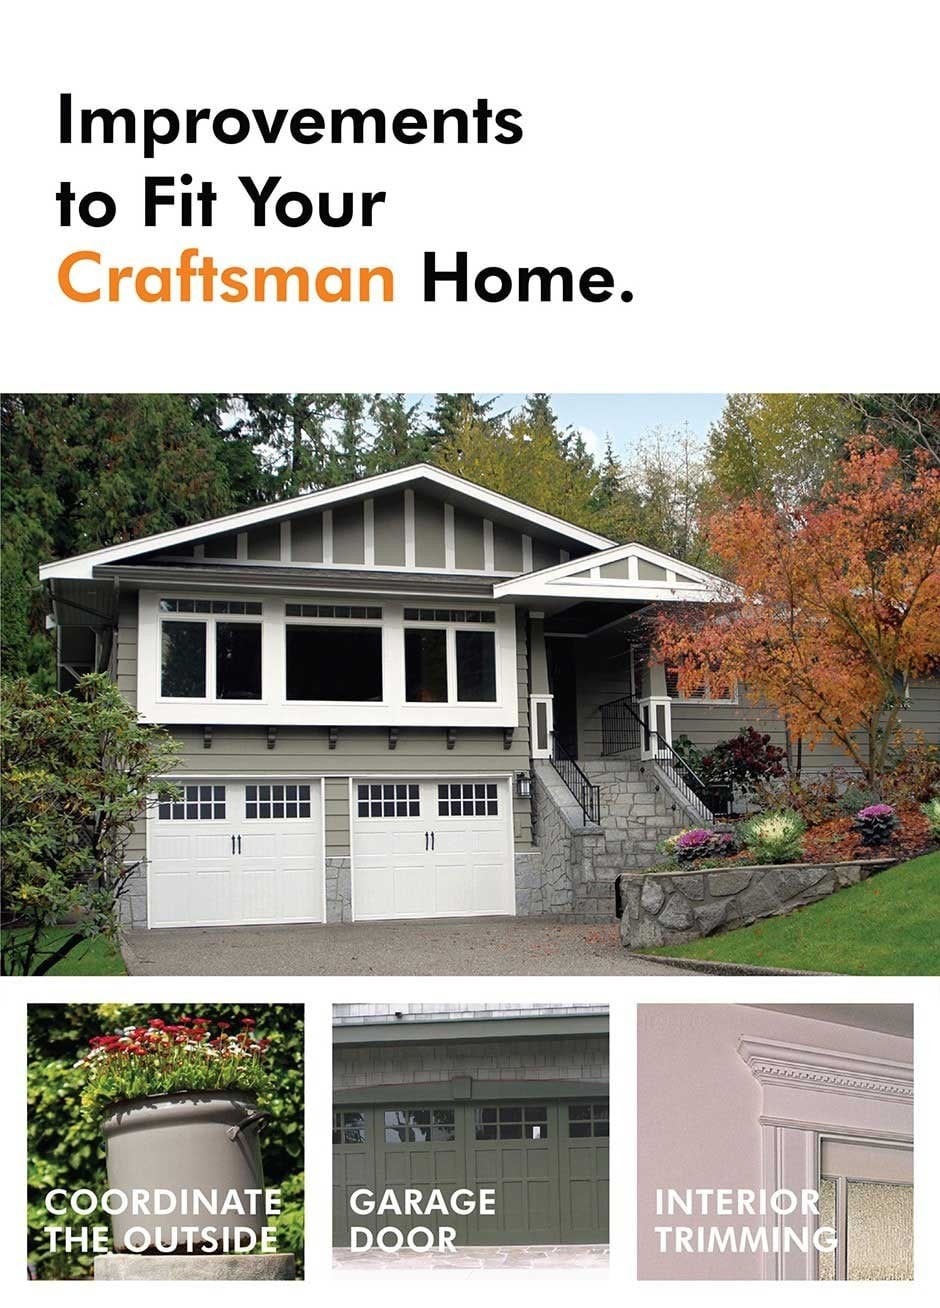 Home improvement ideas for a craftsman home